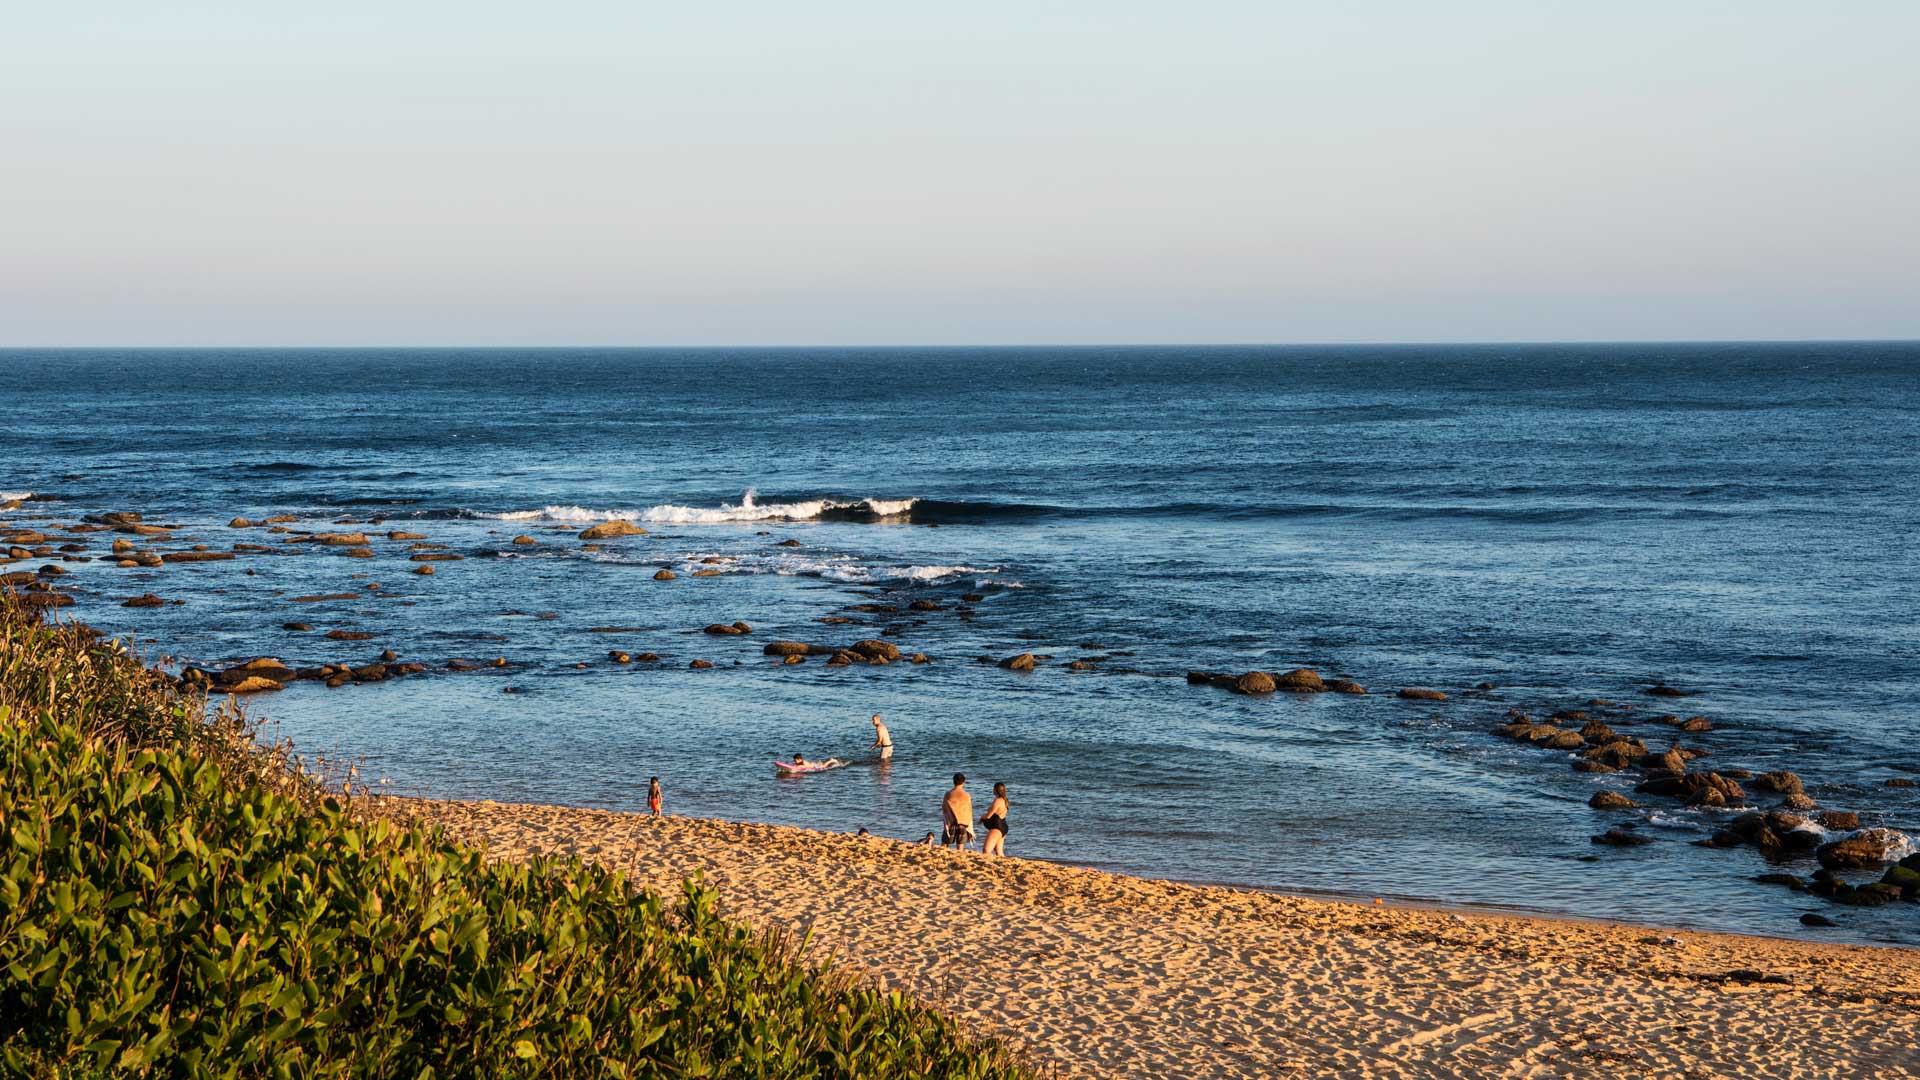 A Weekender's Guide to the Central Coast